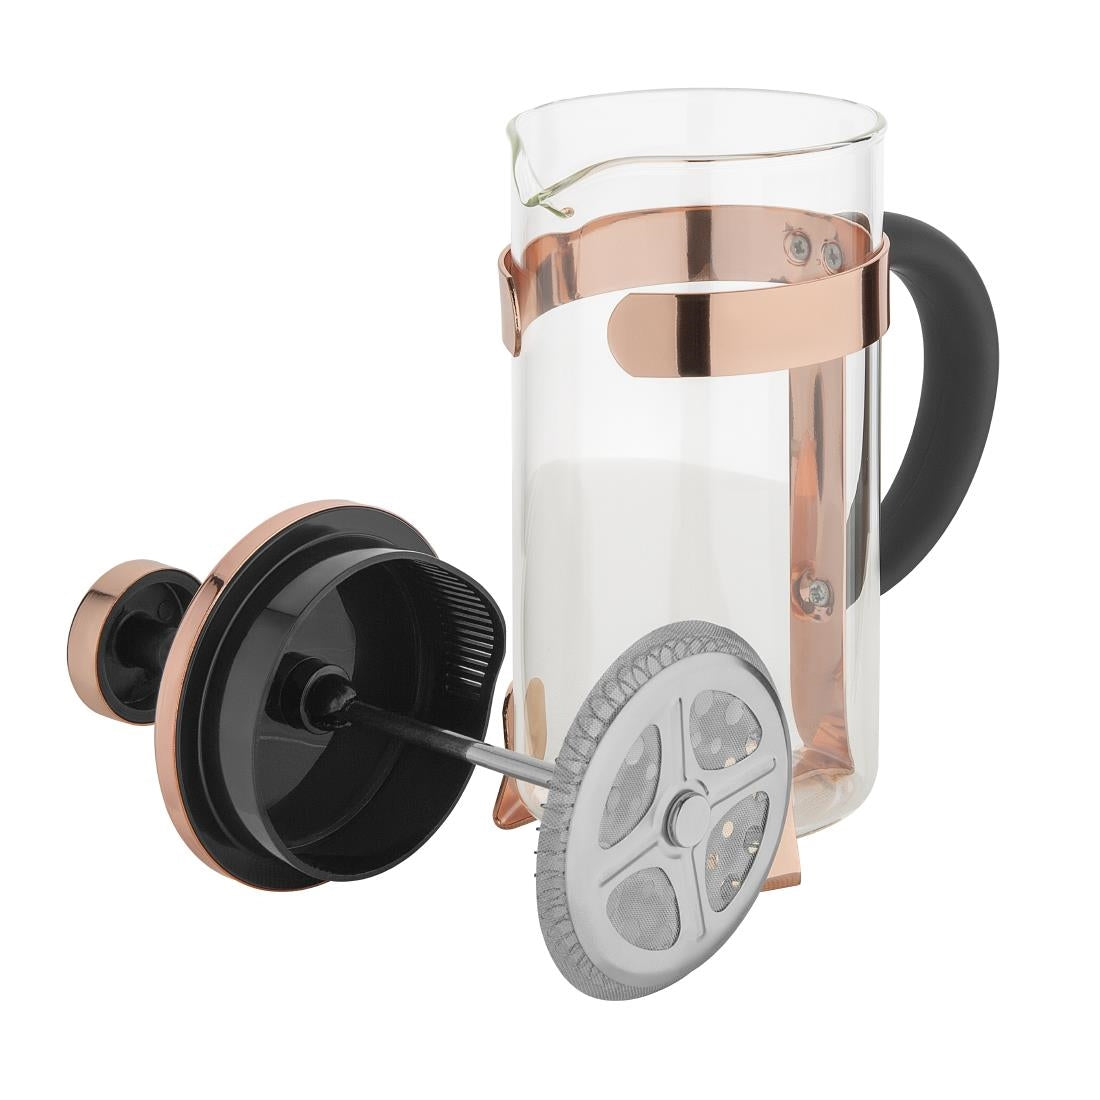 DR745 Olympia Contemporary Cafetiere Copper 3 Cup